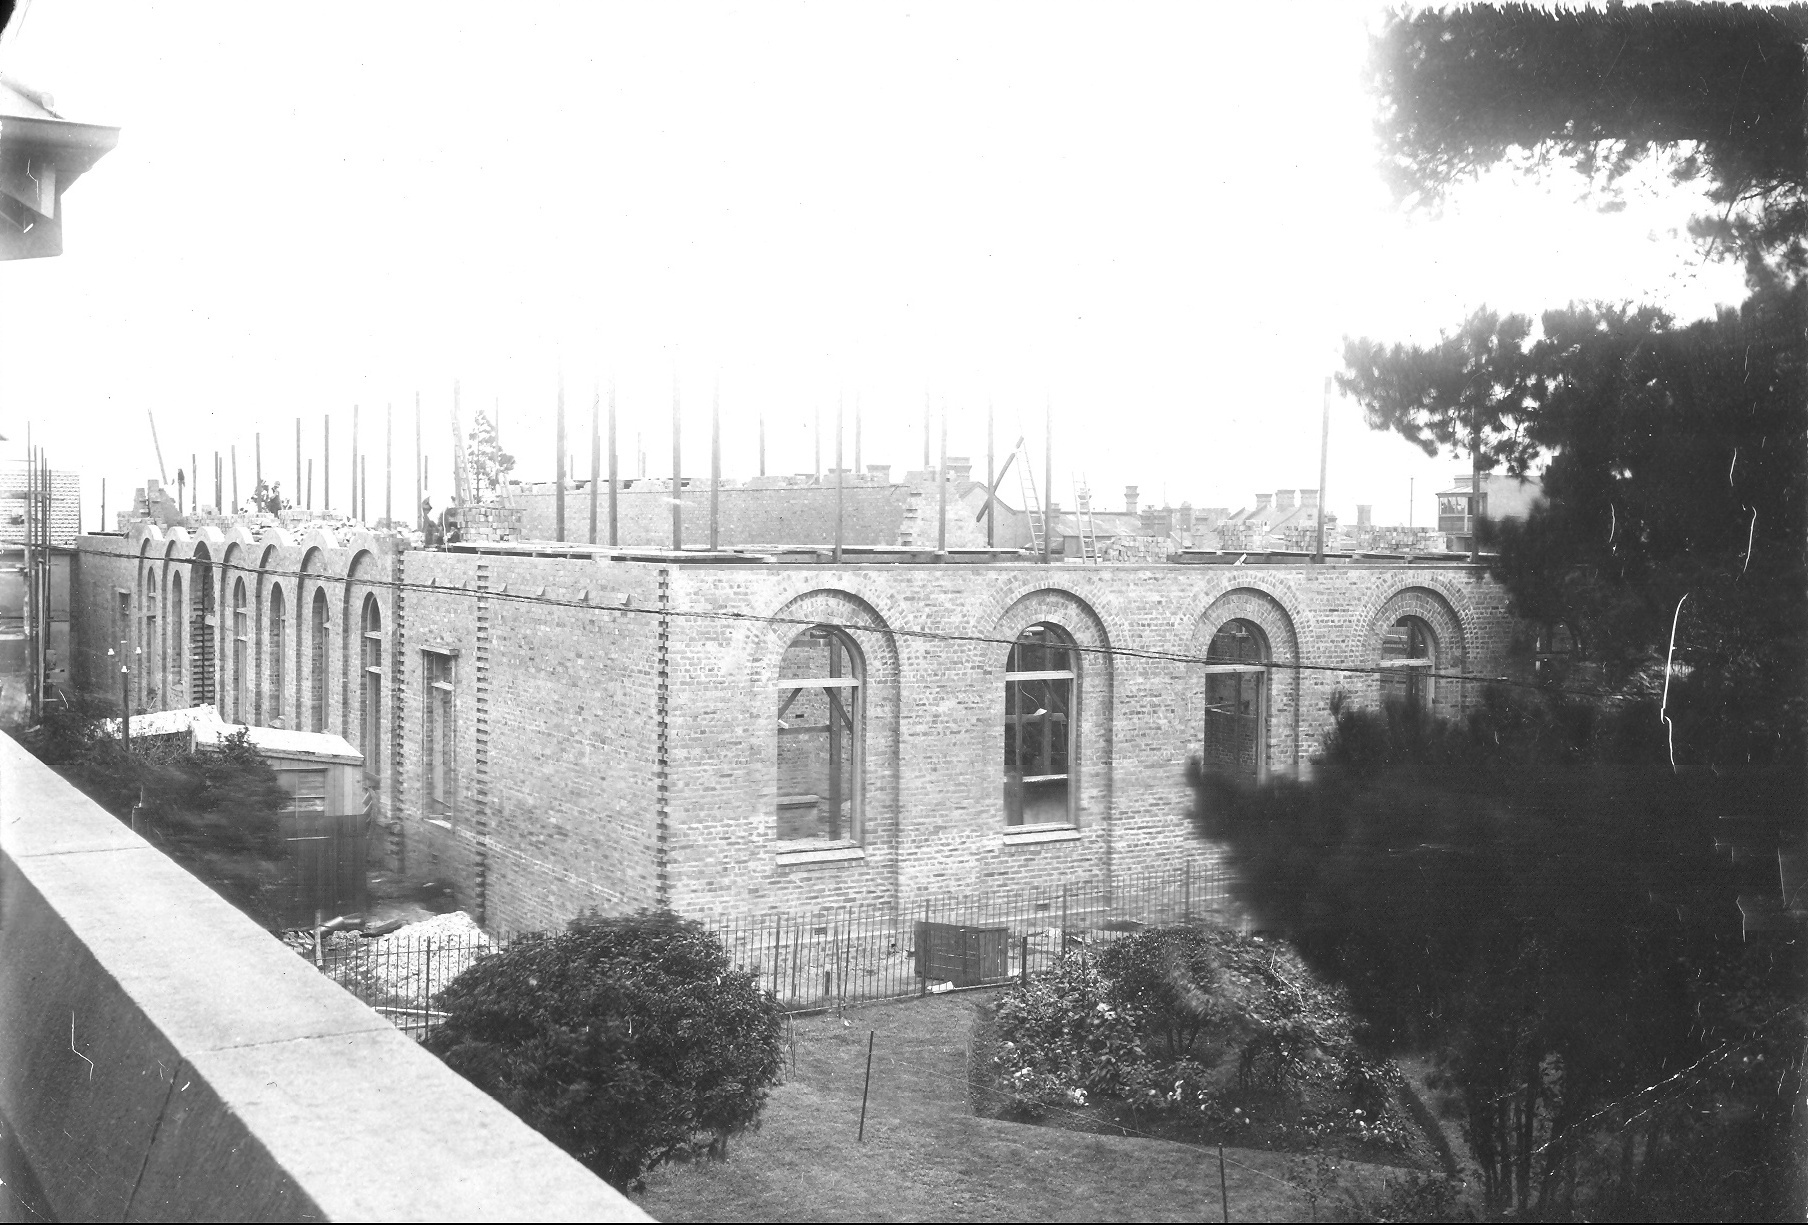 ZOOLOGY BUILDING BEING CONSTRUCTED